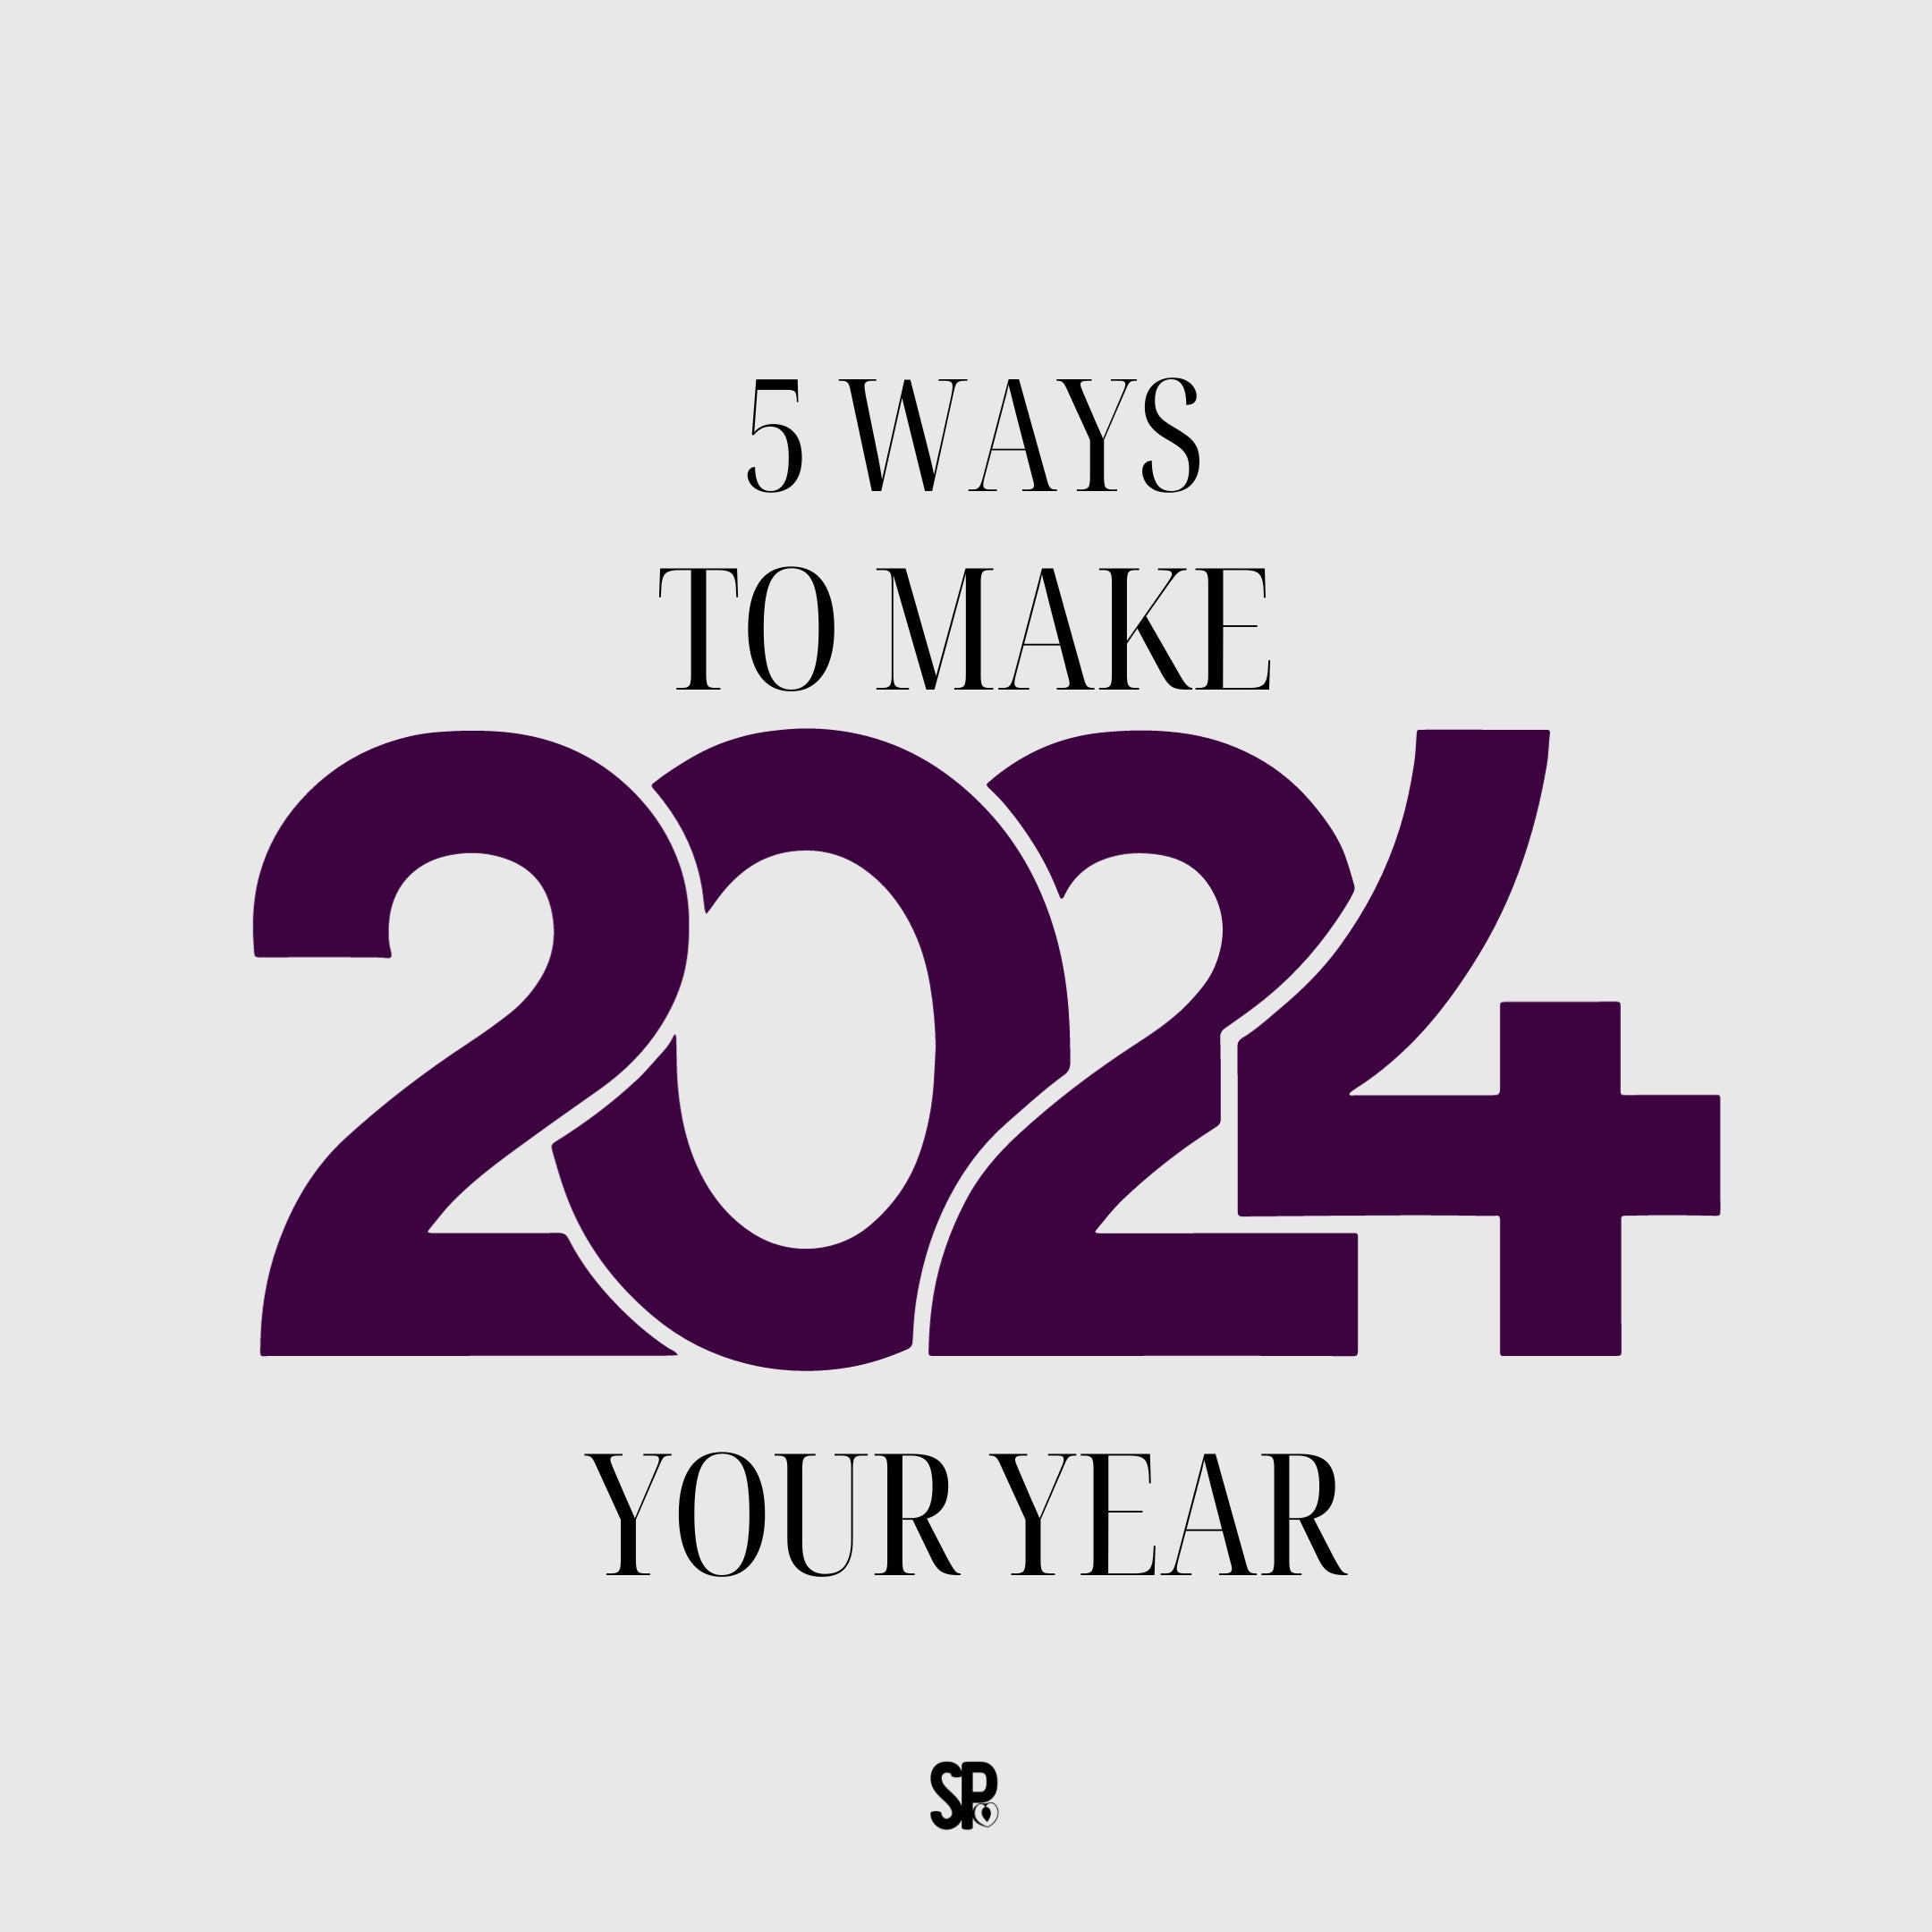 5 Ways to make 2024 your yer.